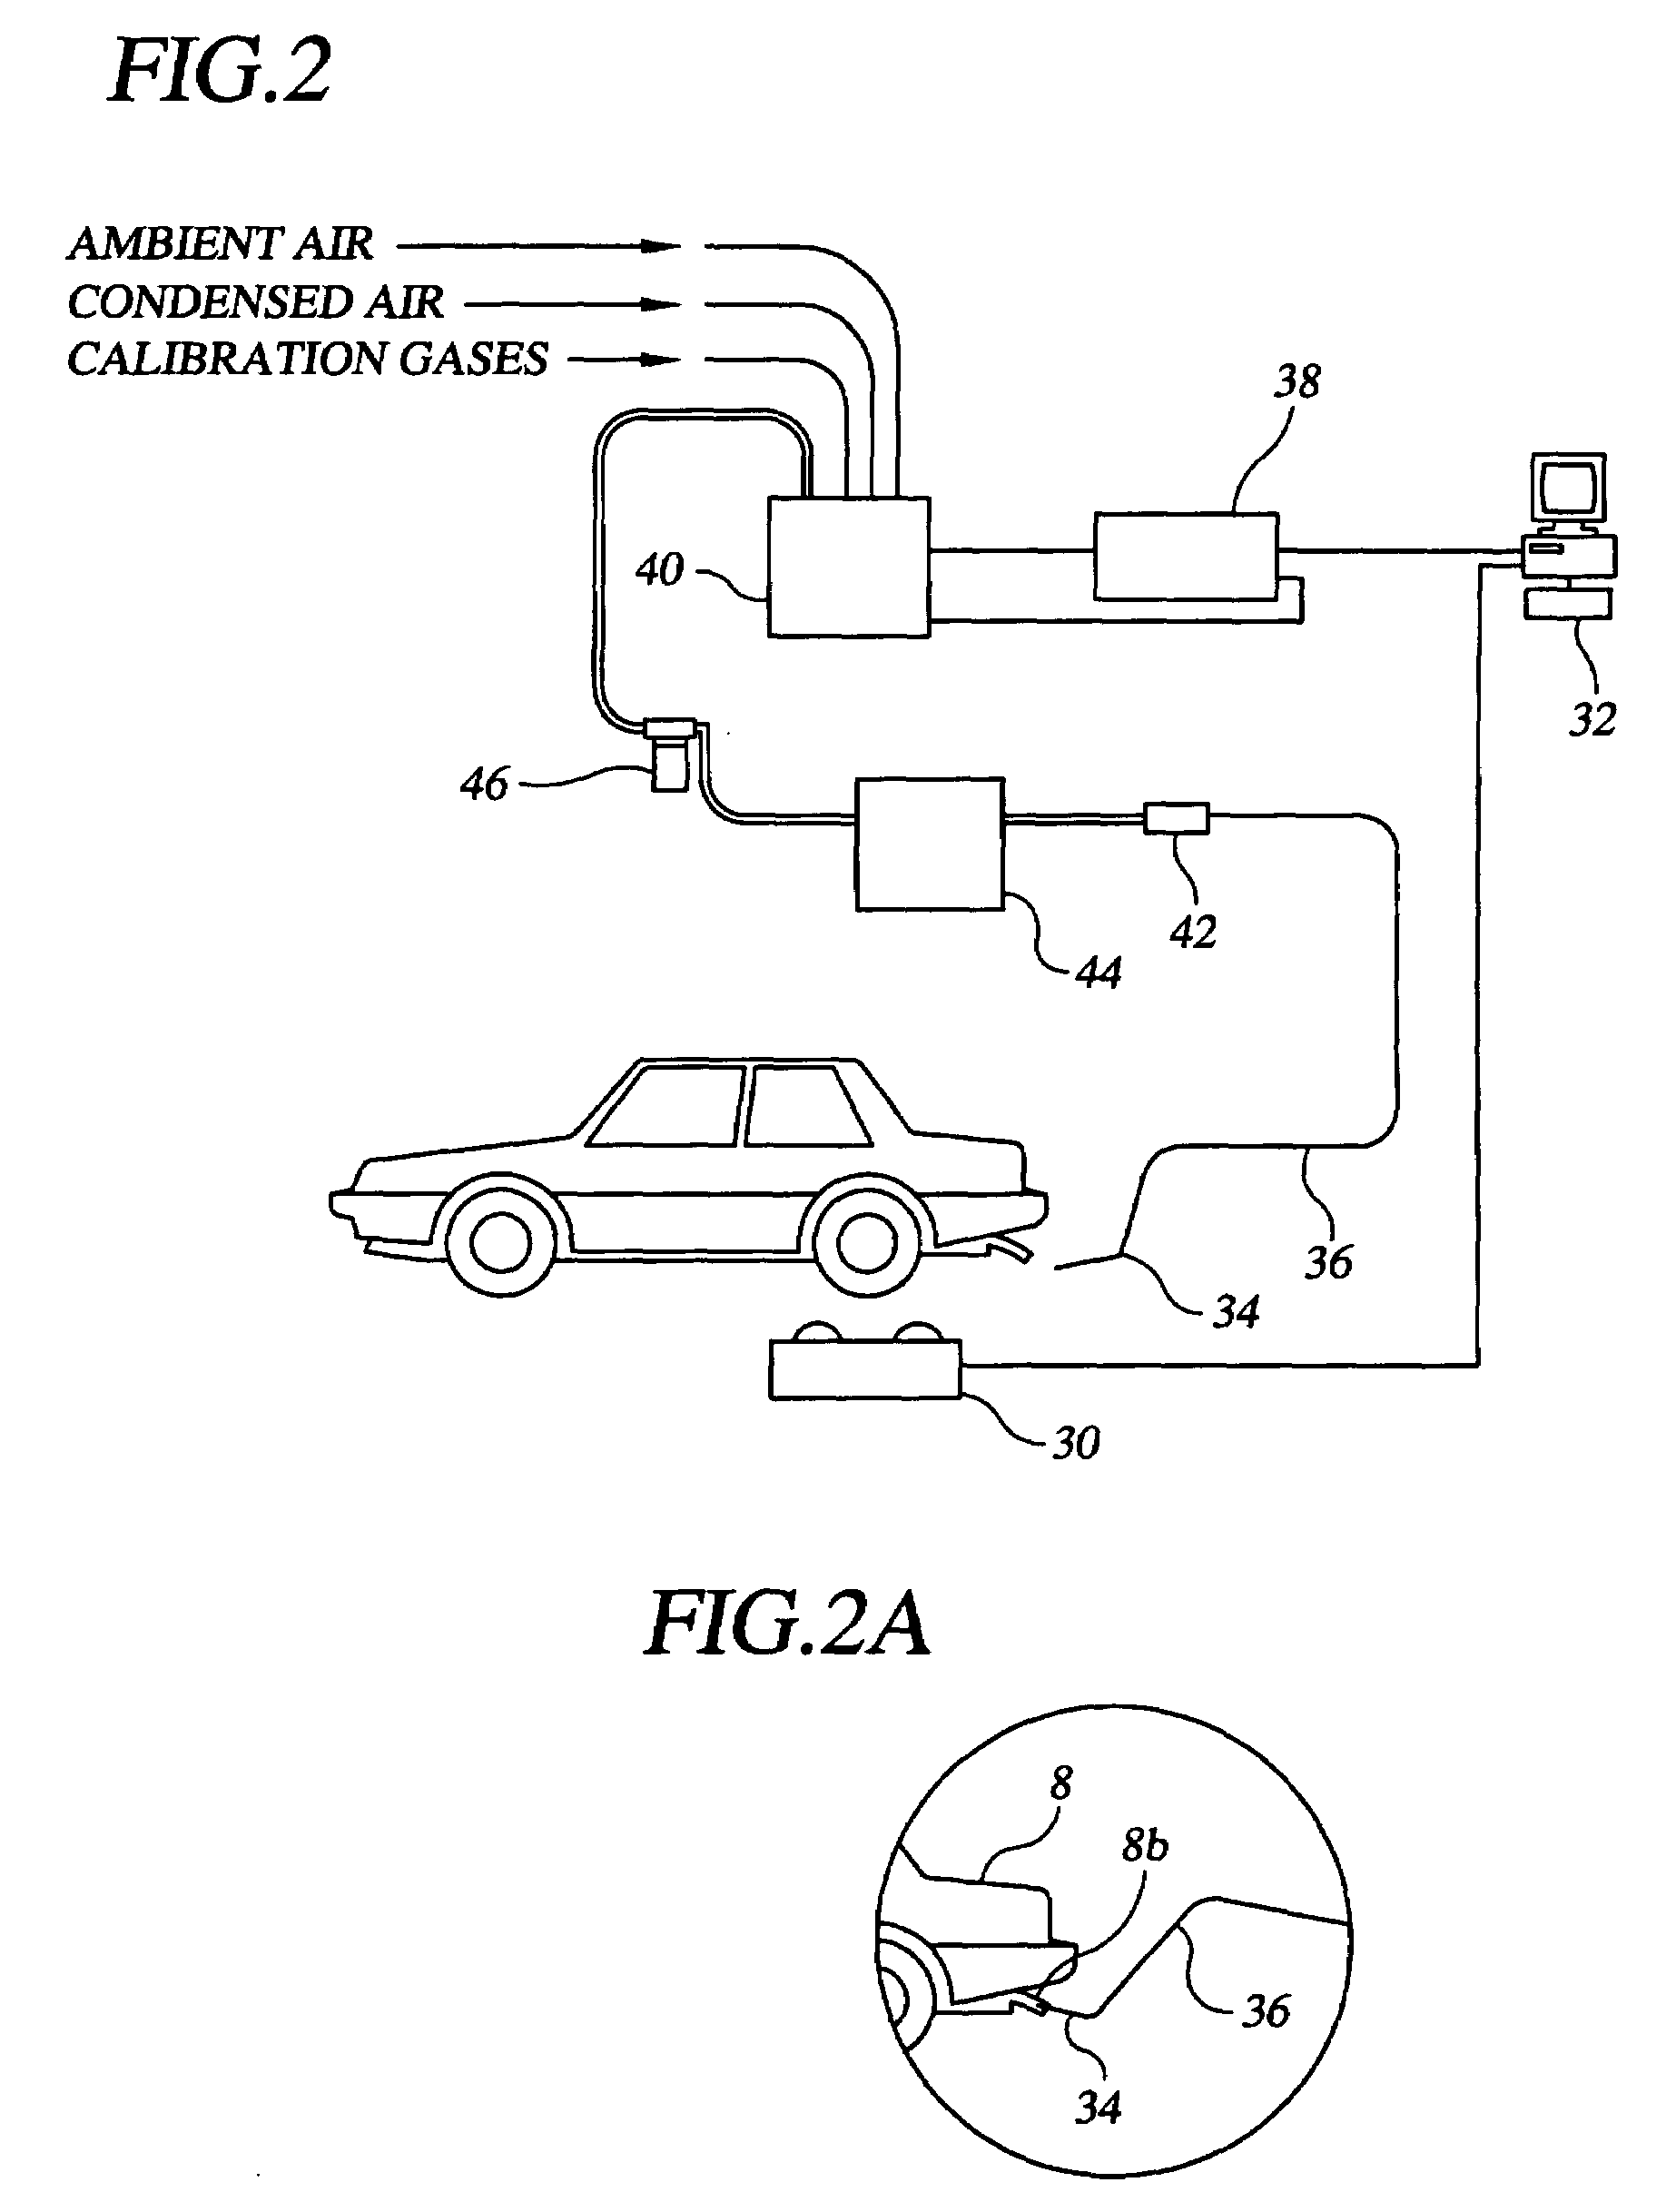 Method and system for vehicle emission testing